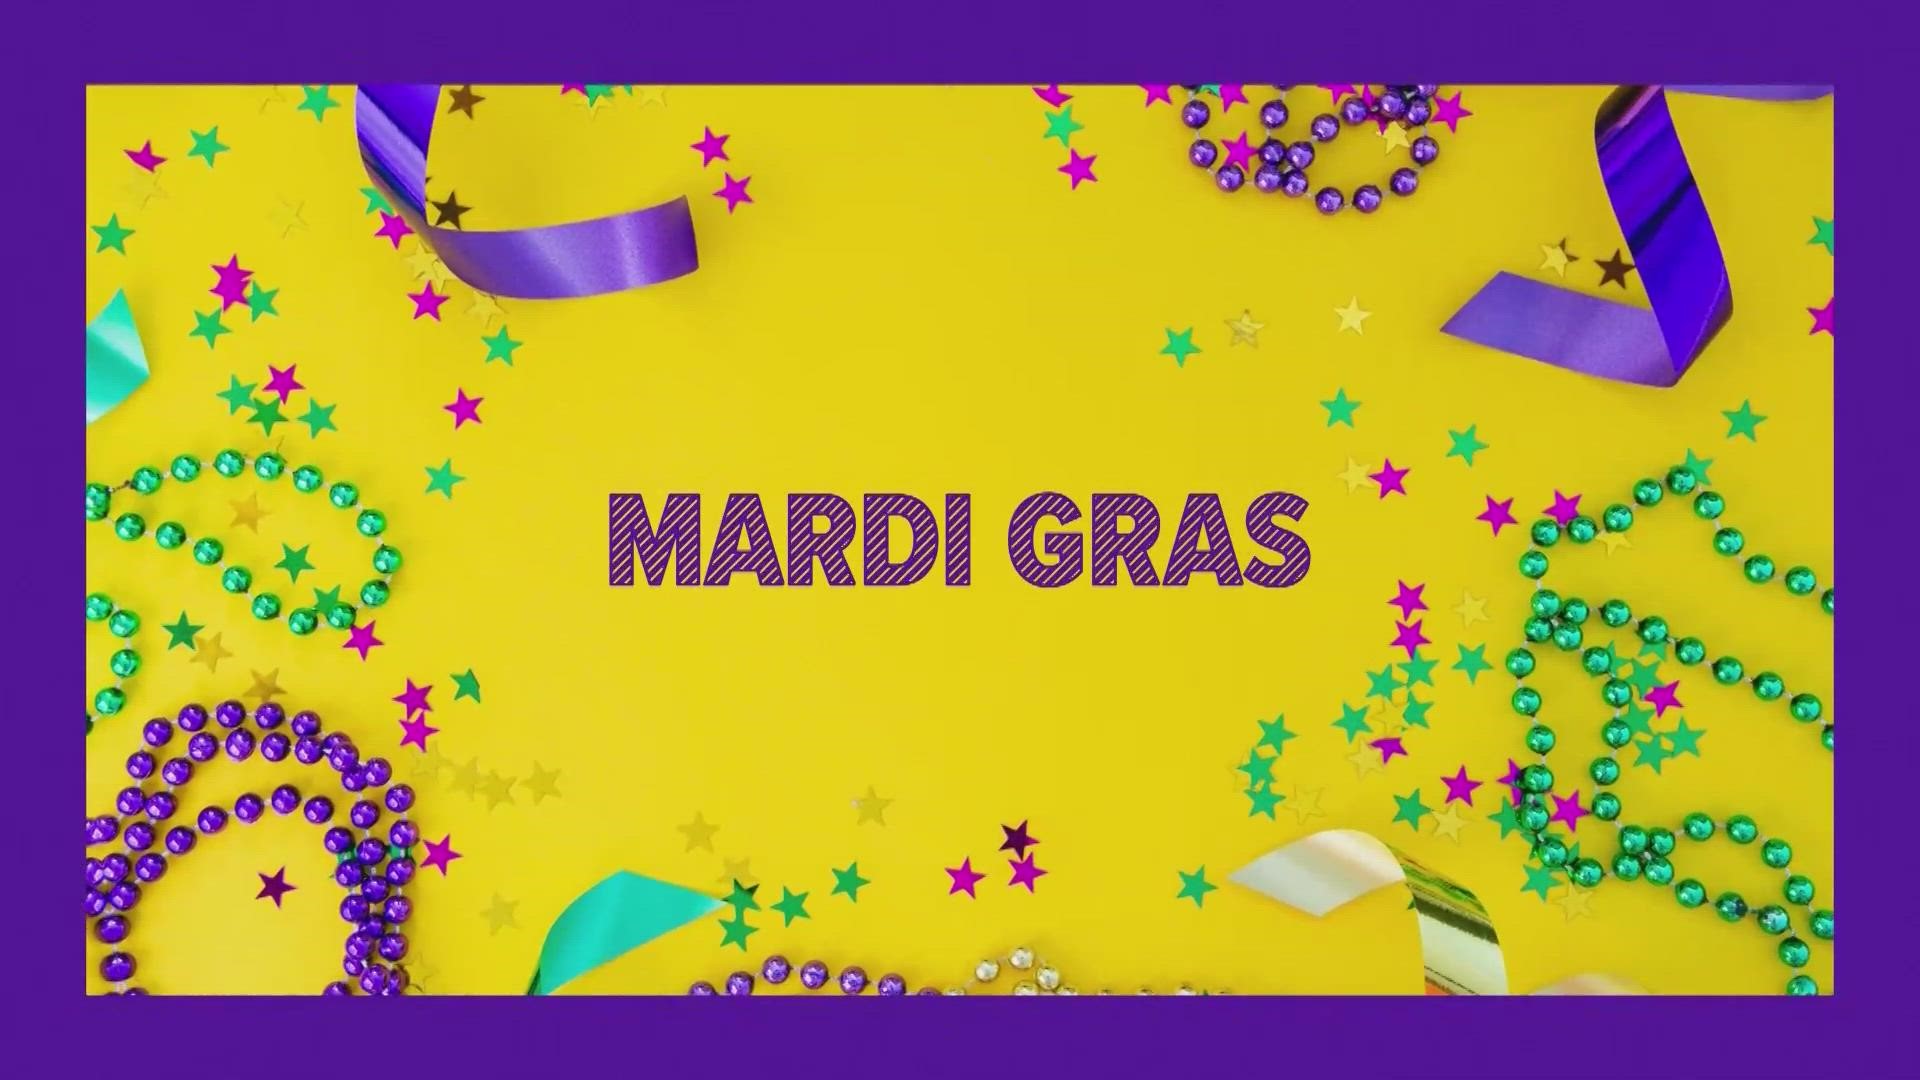 A look into Mardi Gras celebrations and why it is celebrated. From the Fat Tuesday food favorites like King cake and Paczki to the parades and decorations.